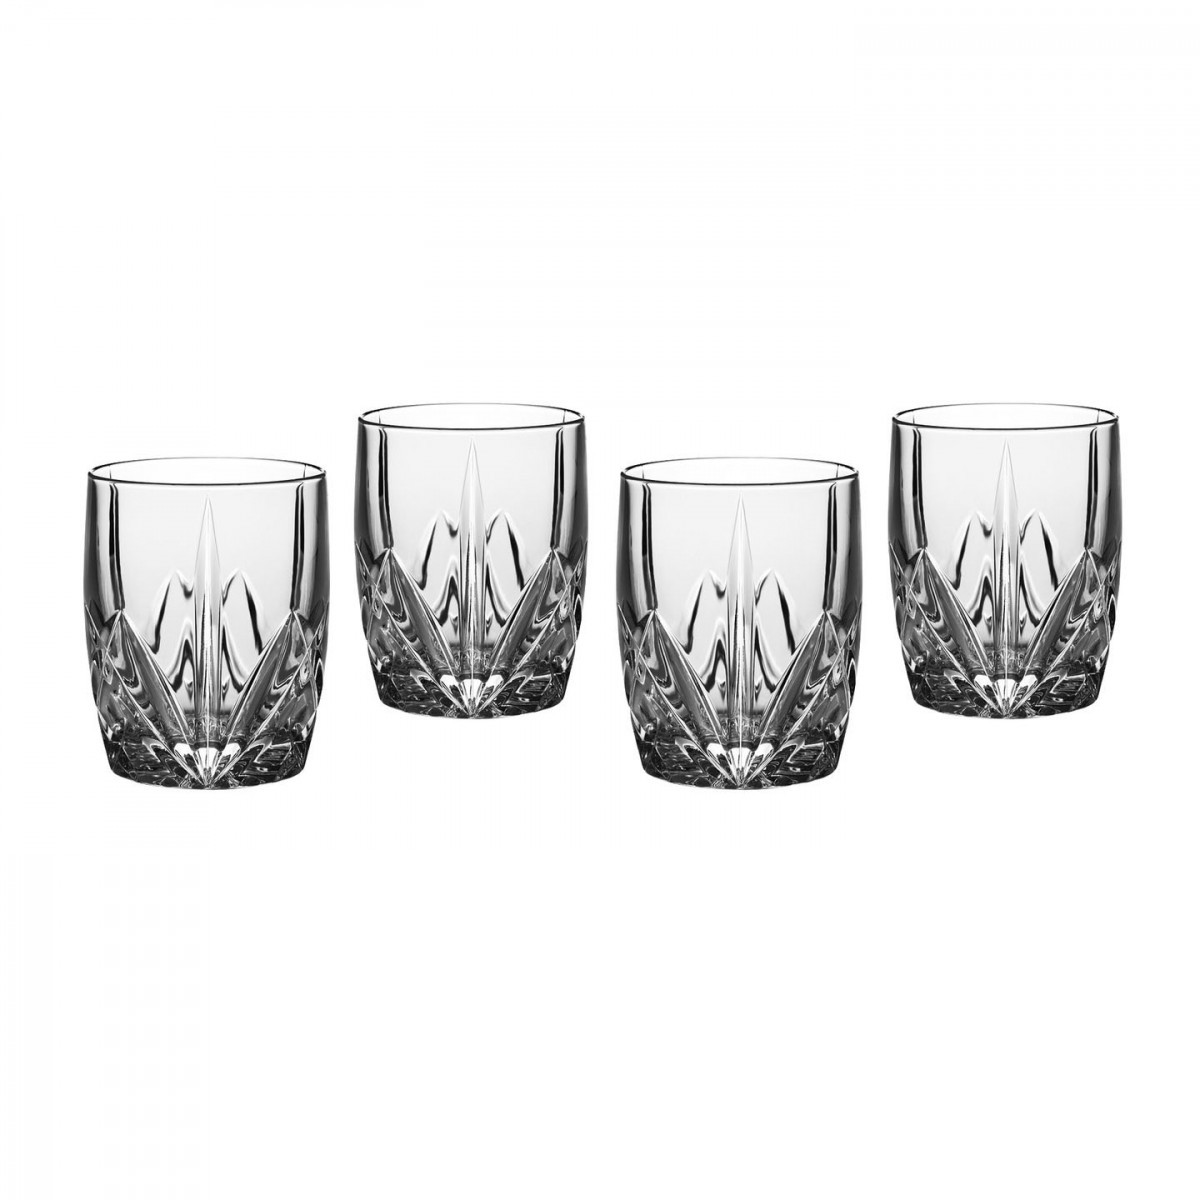 22 Lovable Marquis by Waterford Markham Vase 9 2024 free download marquis by waterford markham vase 9 of brookside double old fashioned set of 4 marquis by waterford us pertaining to brookside double old fashioned set of 4